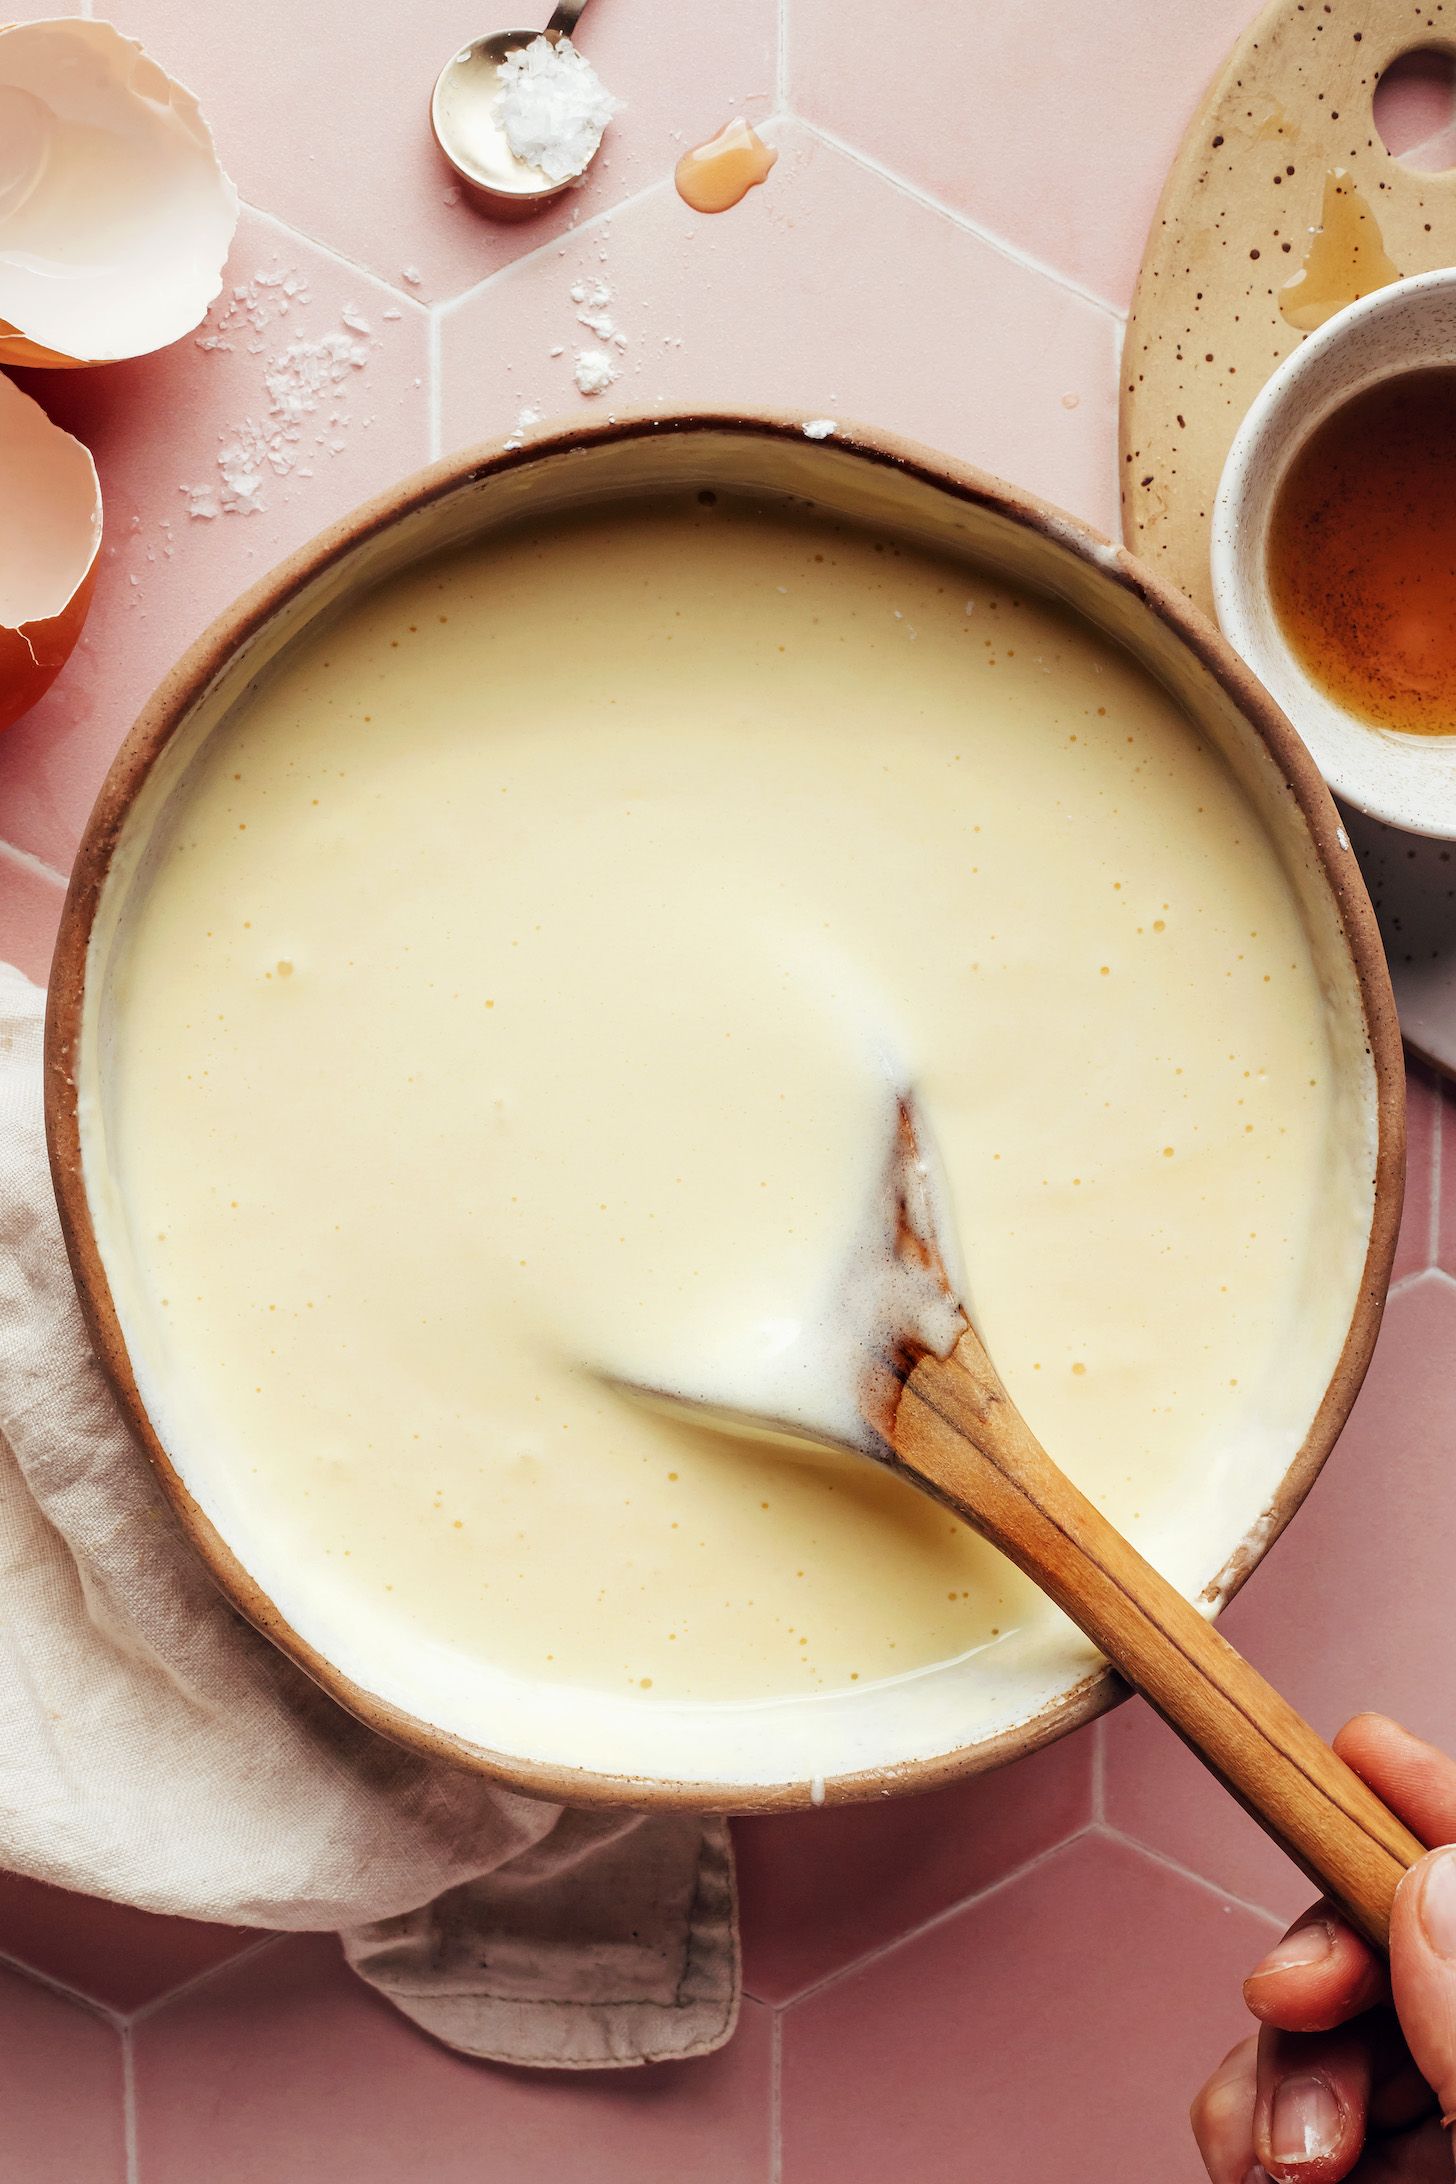 Thick, creamy gluten-free dairy-free crepe batter